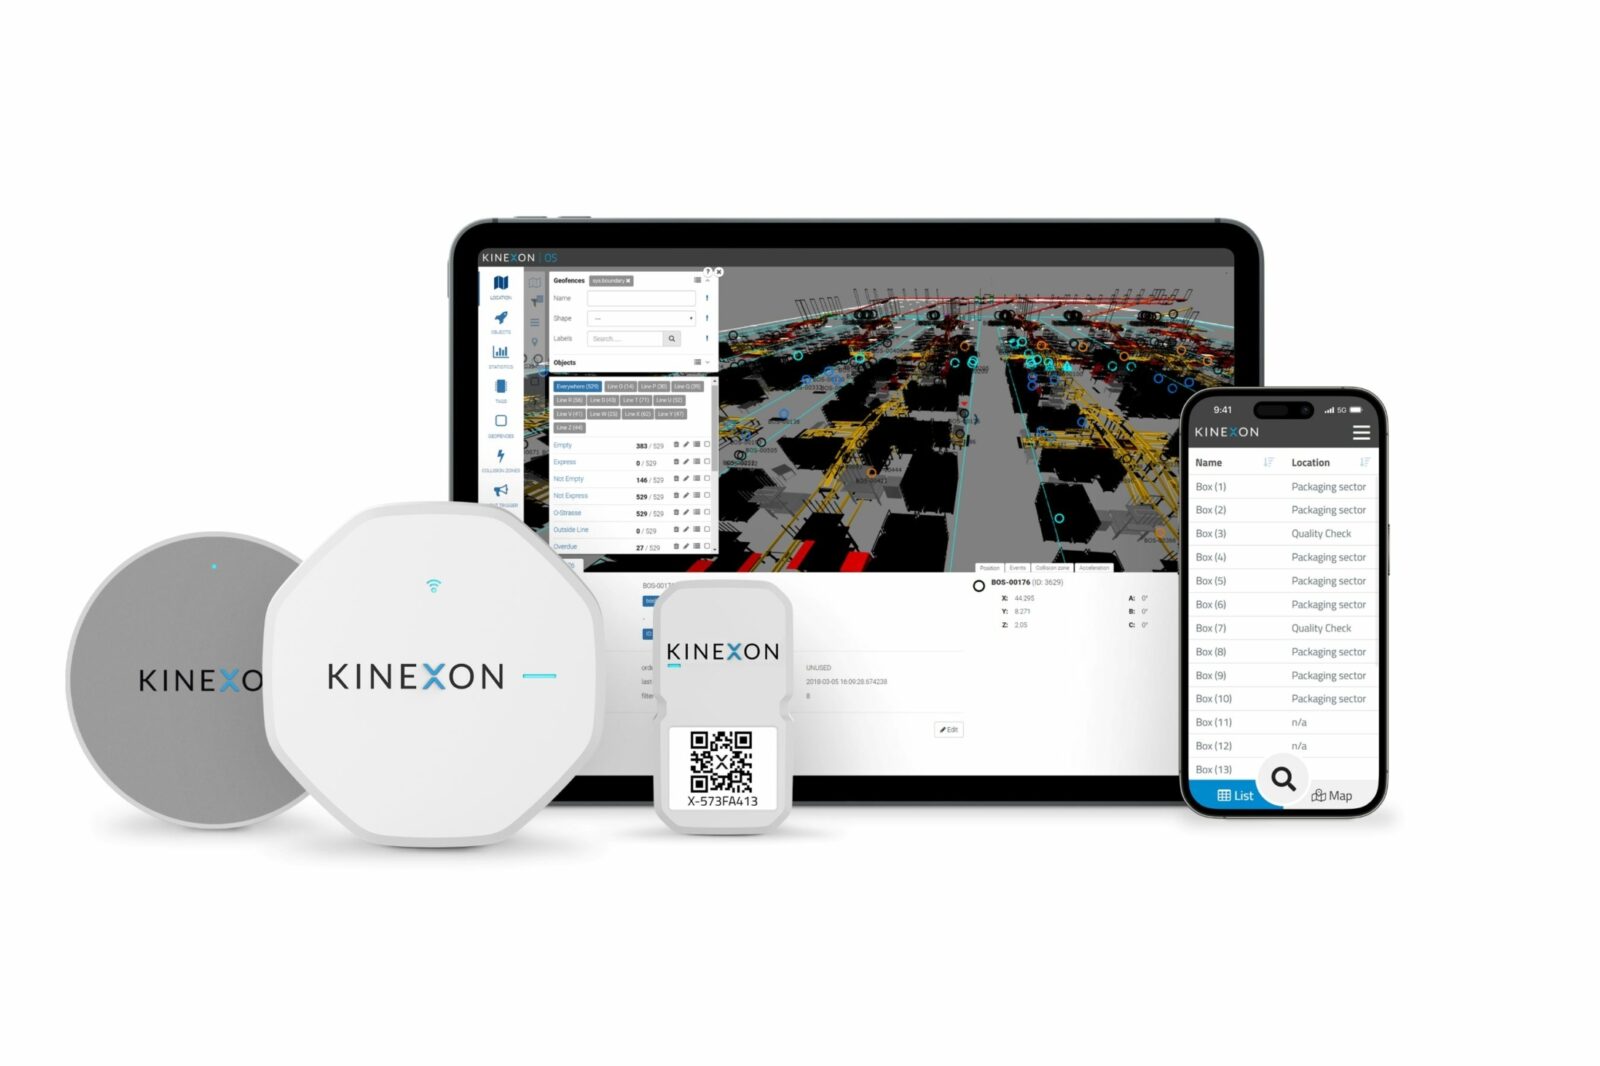 A overview of the KINEXON Mesh Product family including trackers, tags, sensors a tablet and smartphone.